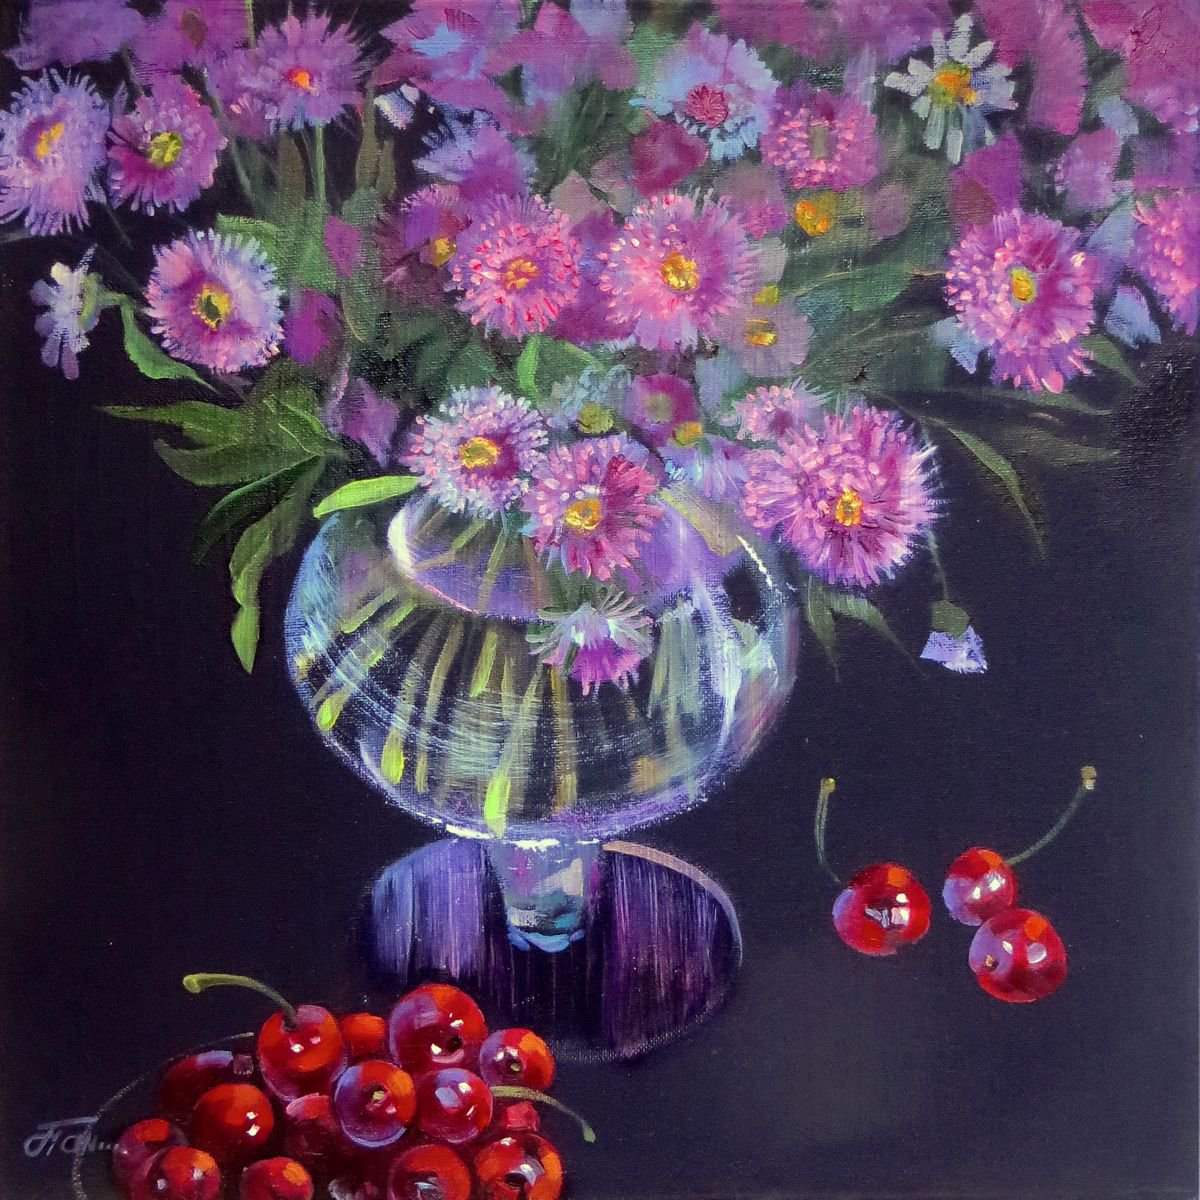 FLOWERS and CHERRIES, oil on canvas, 50x50 by Olga Panina